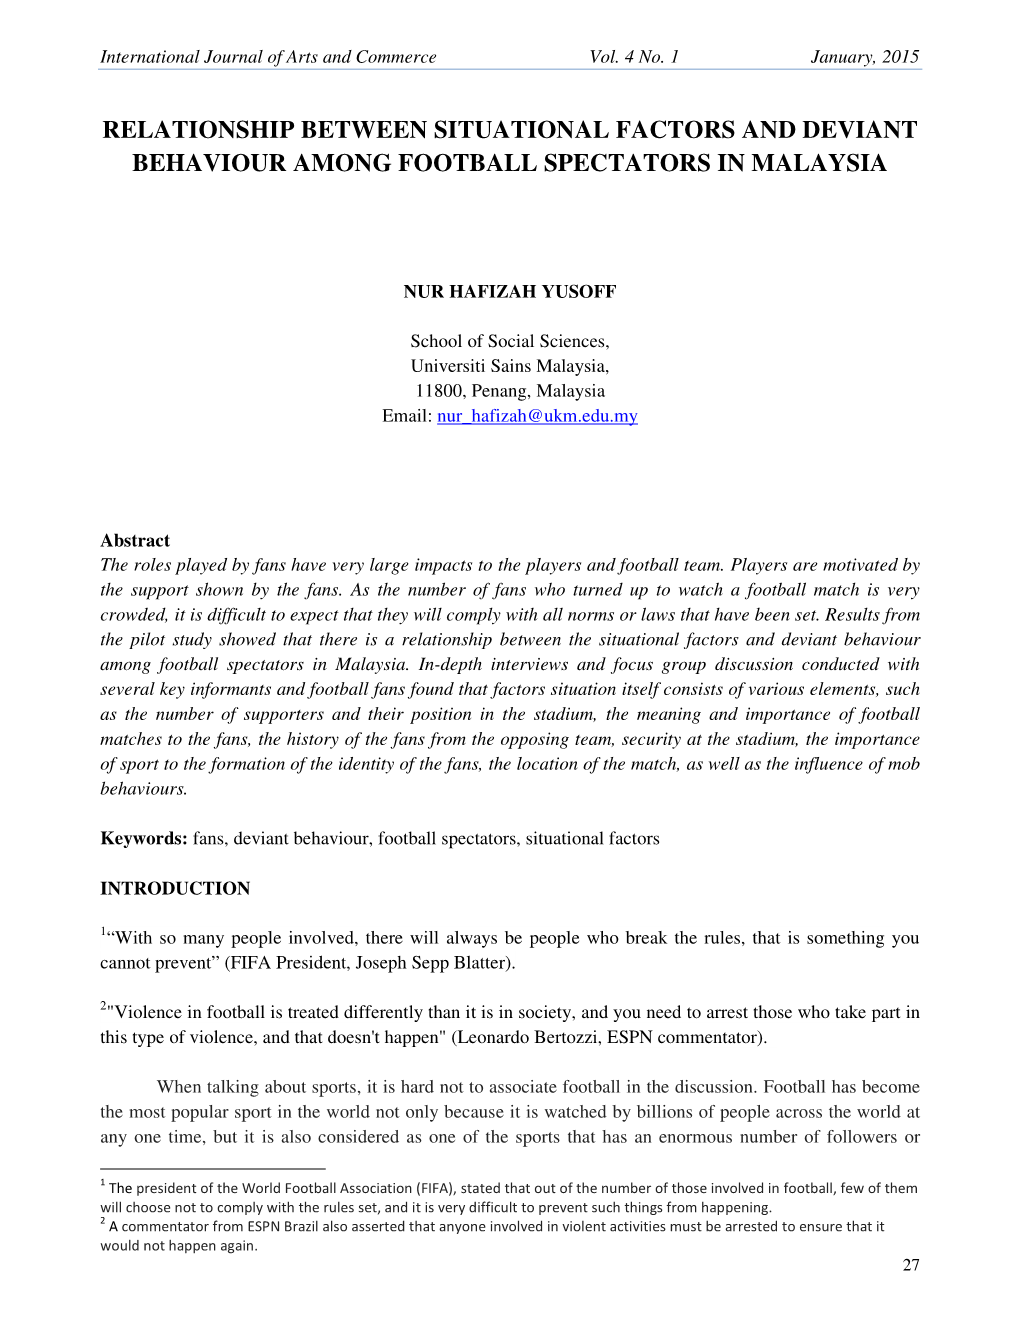 Relationship Between Situational Factors and Deviant Behaviour Among Football Spectators in Malaysia